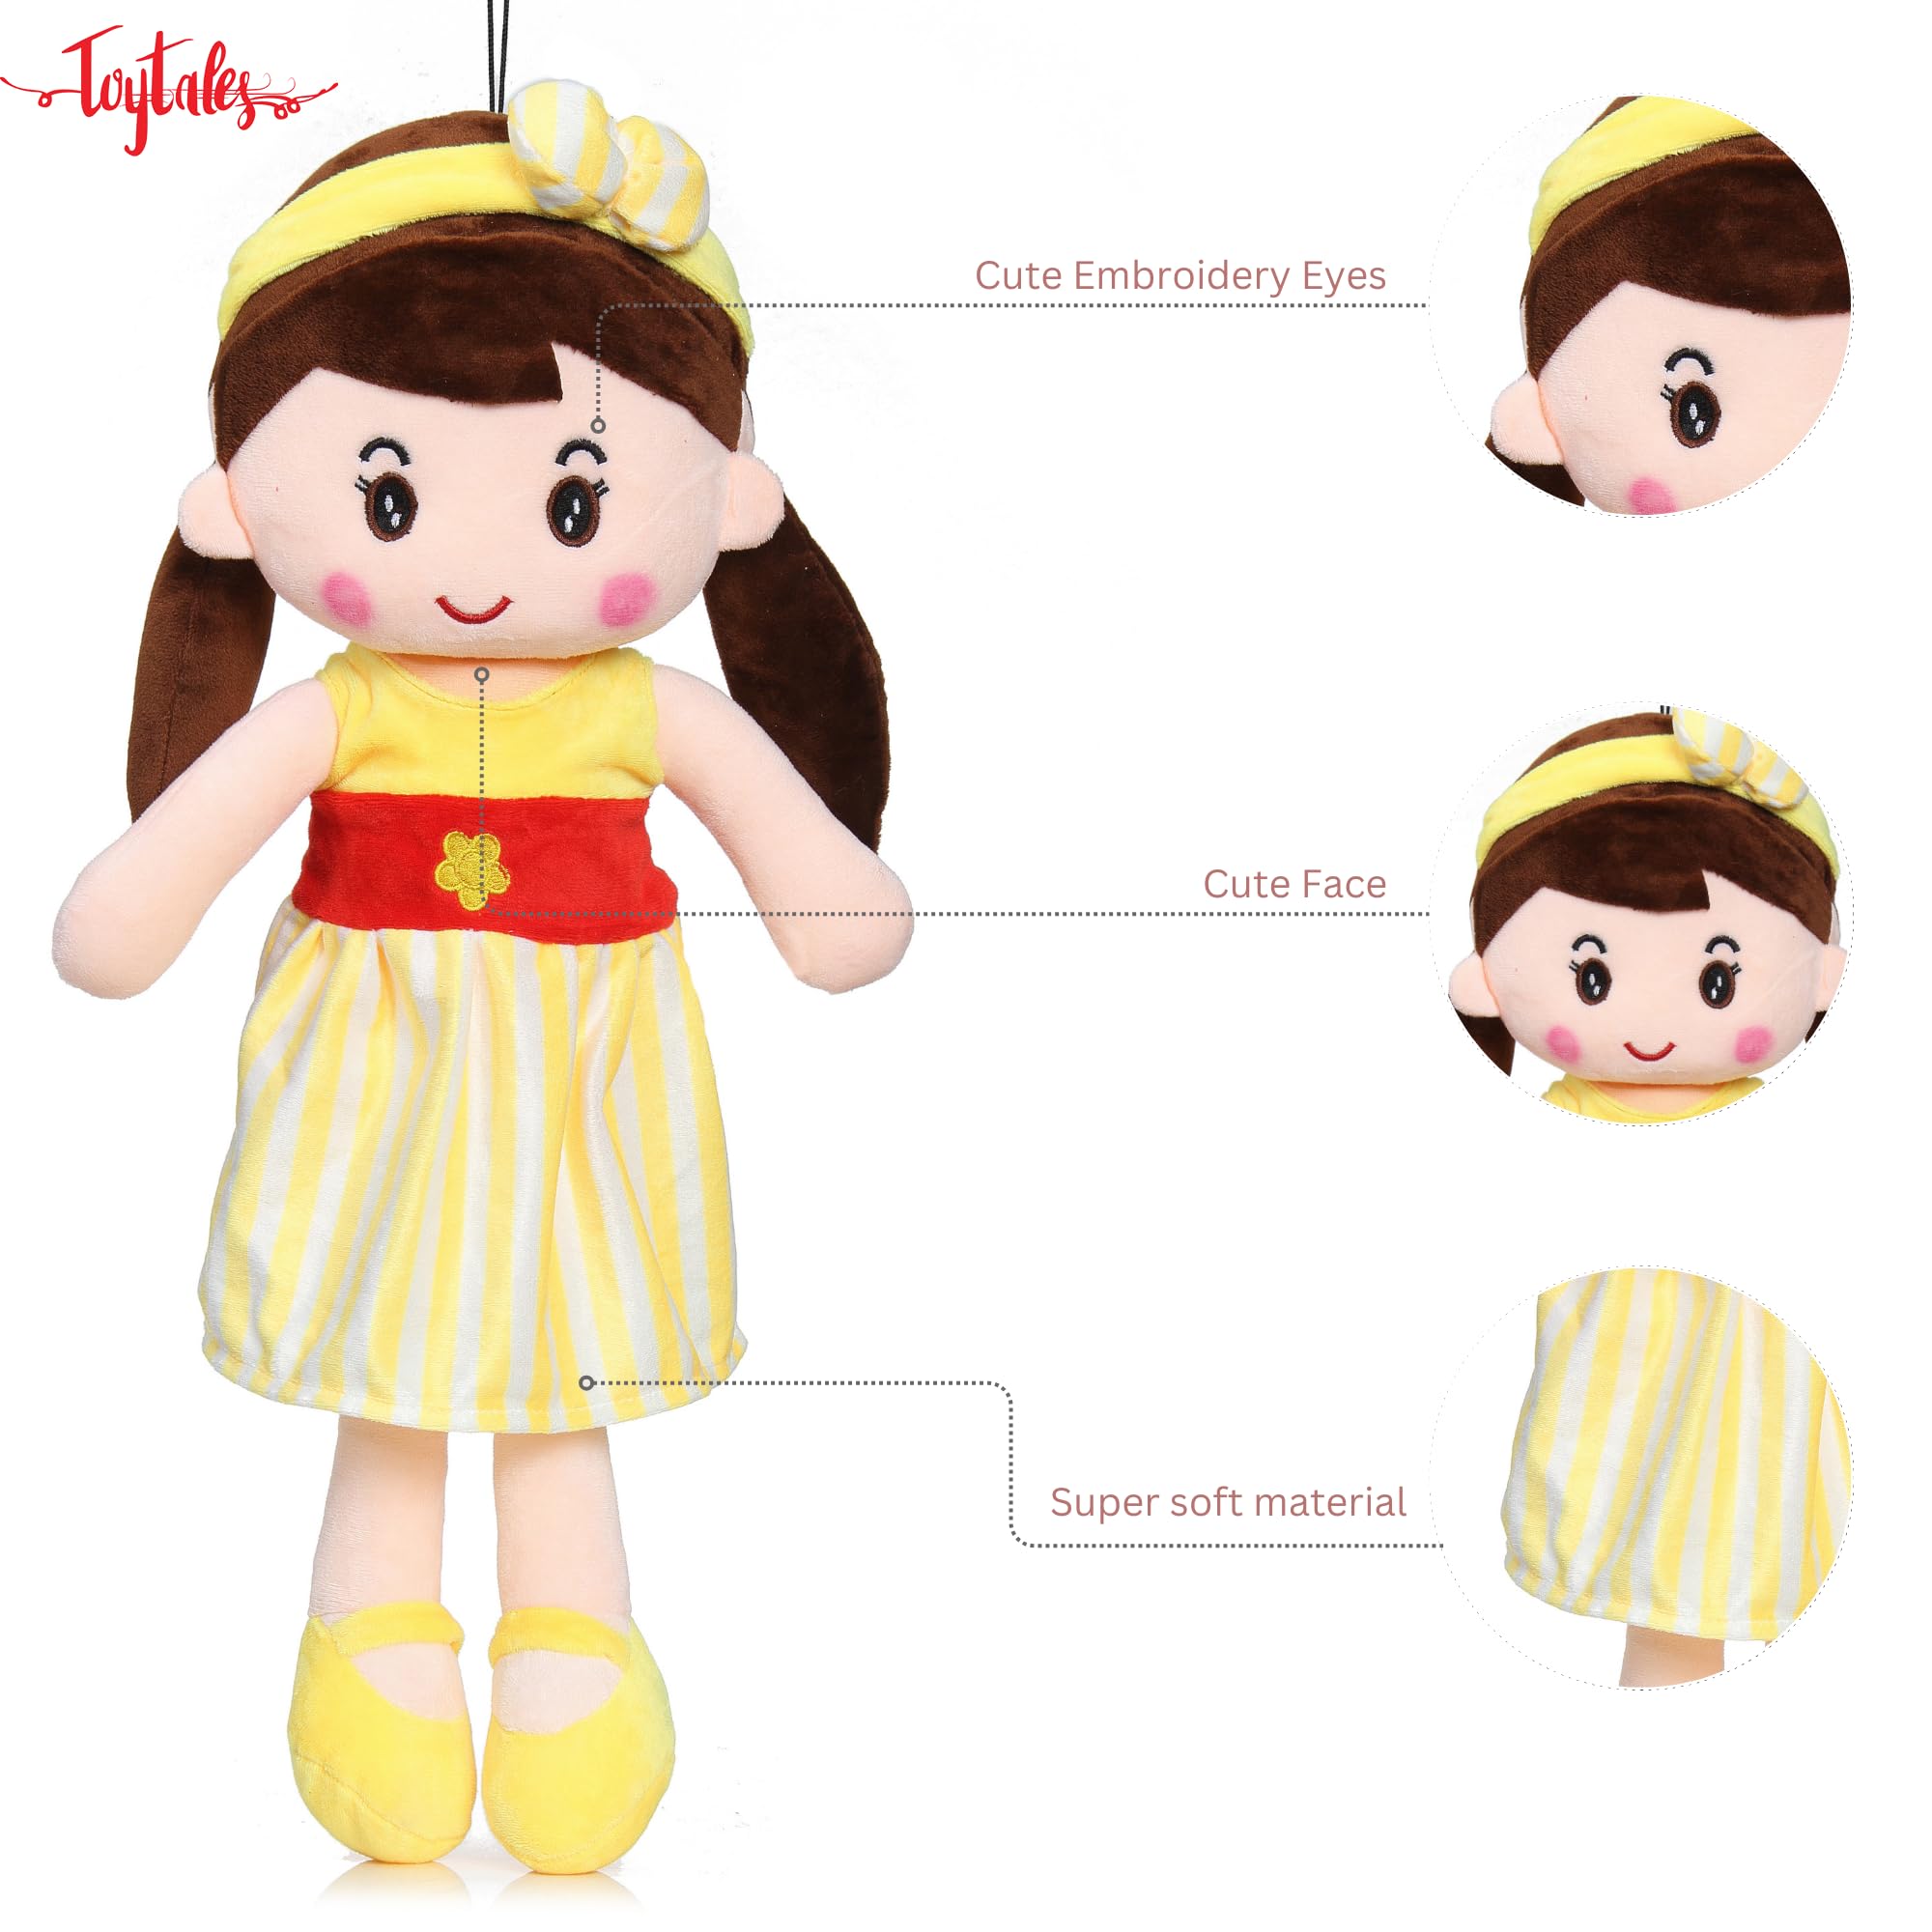 Cute Super Soft Stuffed Doll Medium Size 60cm, Cuddly Squishy Dolls, Plush Toy for Baby Girls, Spark Imaginative Play, Safe & Fun Gift for Kids, Perfect for Playtime & Cuddling (Yellow)